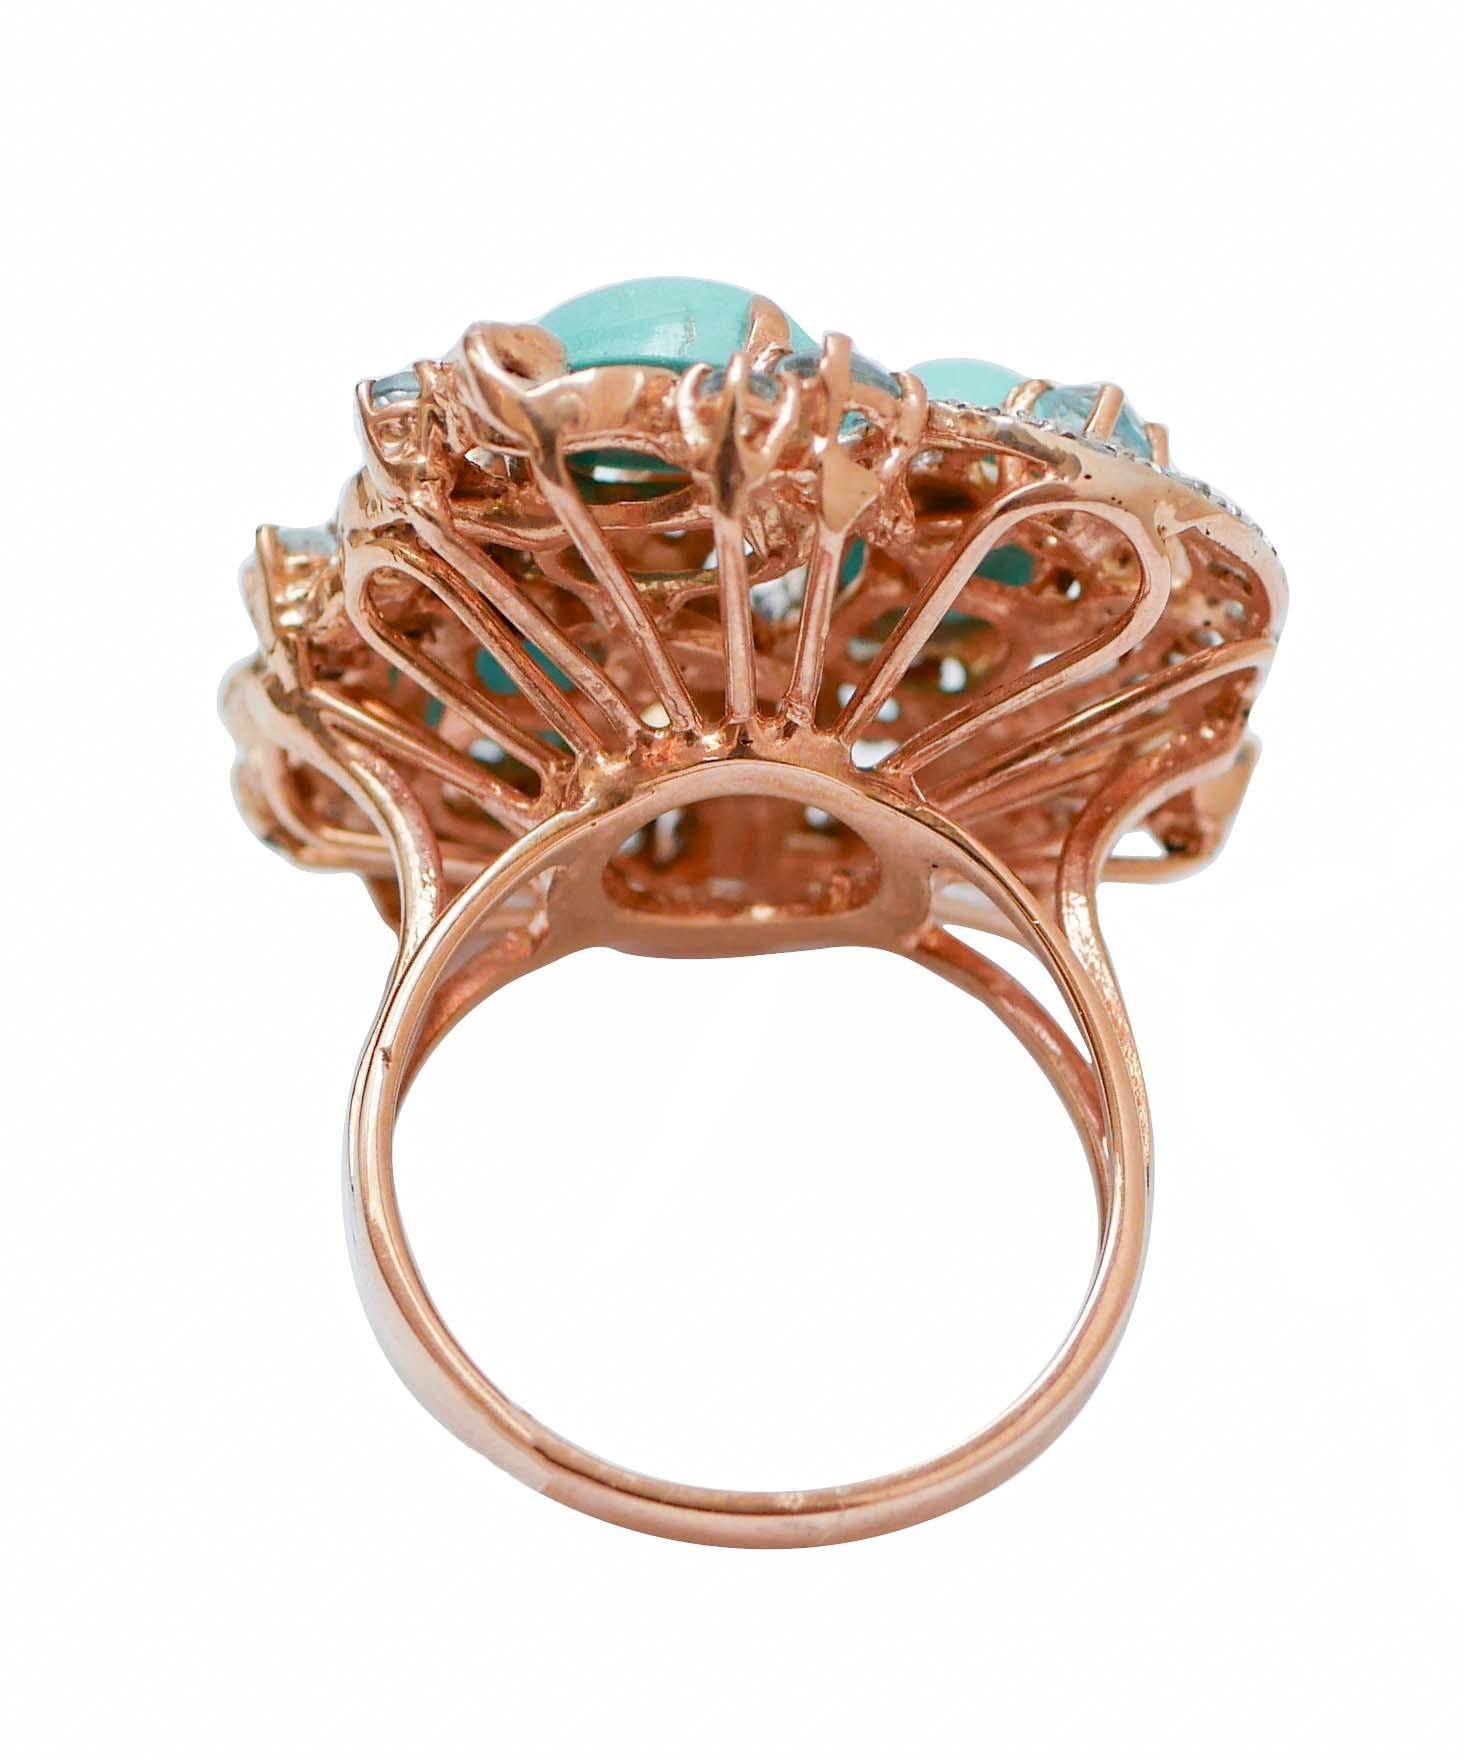 Retro Aquamarine Colour Topazs, Turquoises, Diamonds, 14 Kt Rose Gold and Silver Ring. For Sale